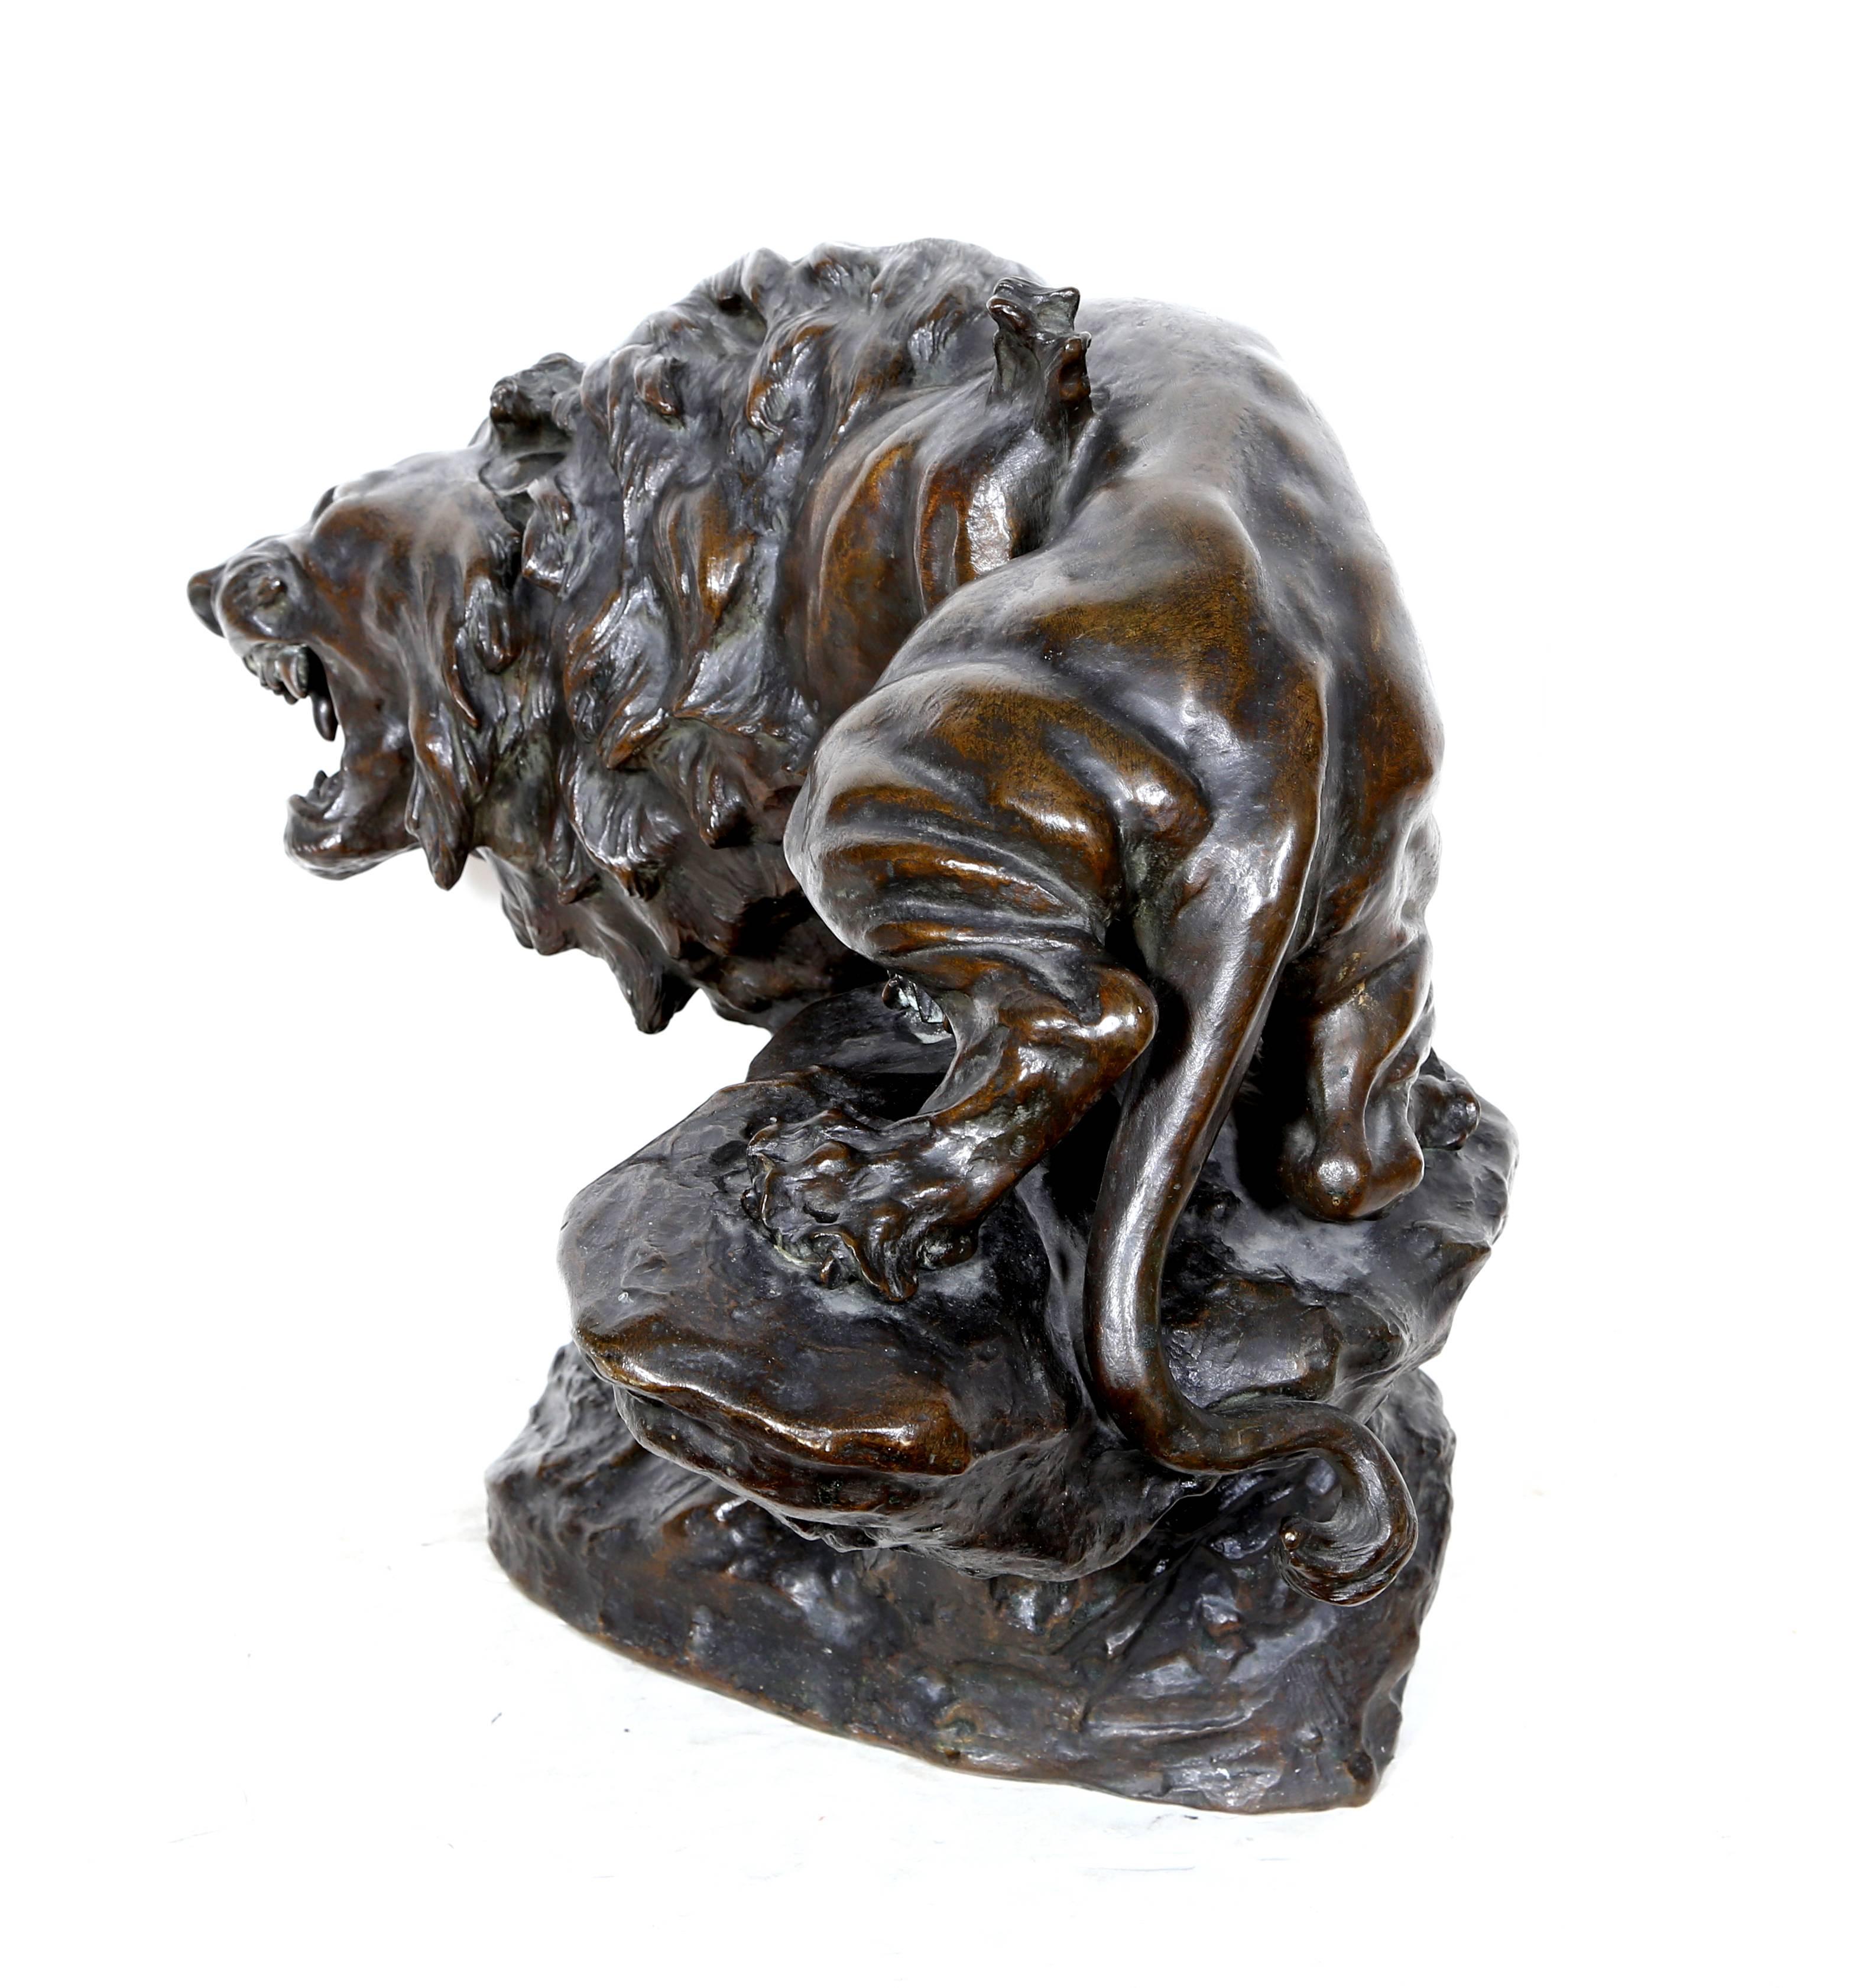 Snarling Lion - Sculpture by Thomas Francois-Cartier